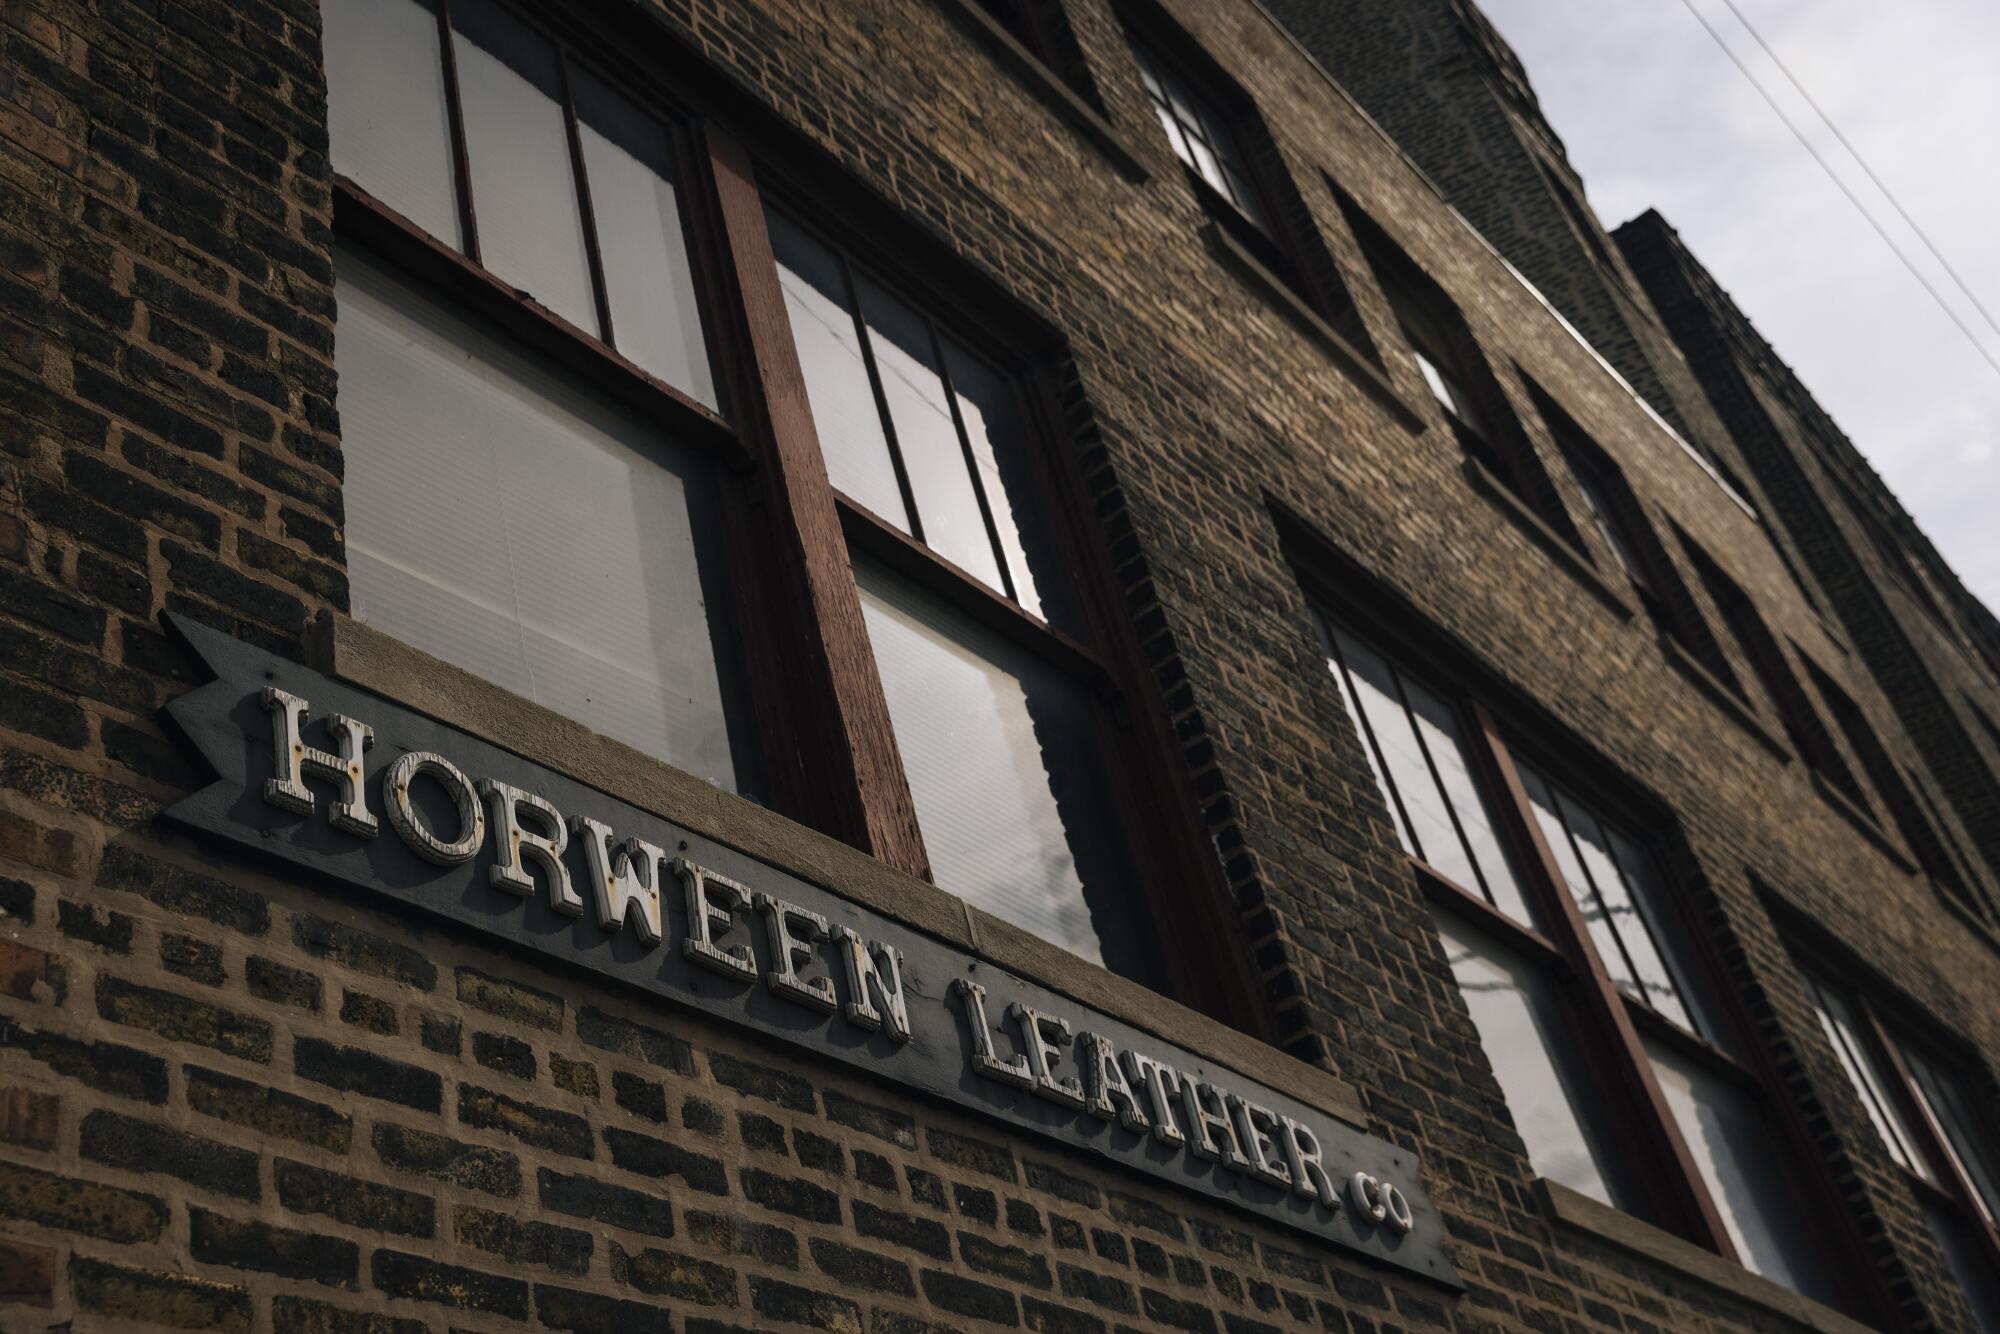 The exterior of Horween Leather Company